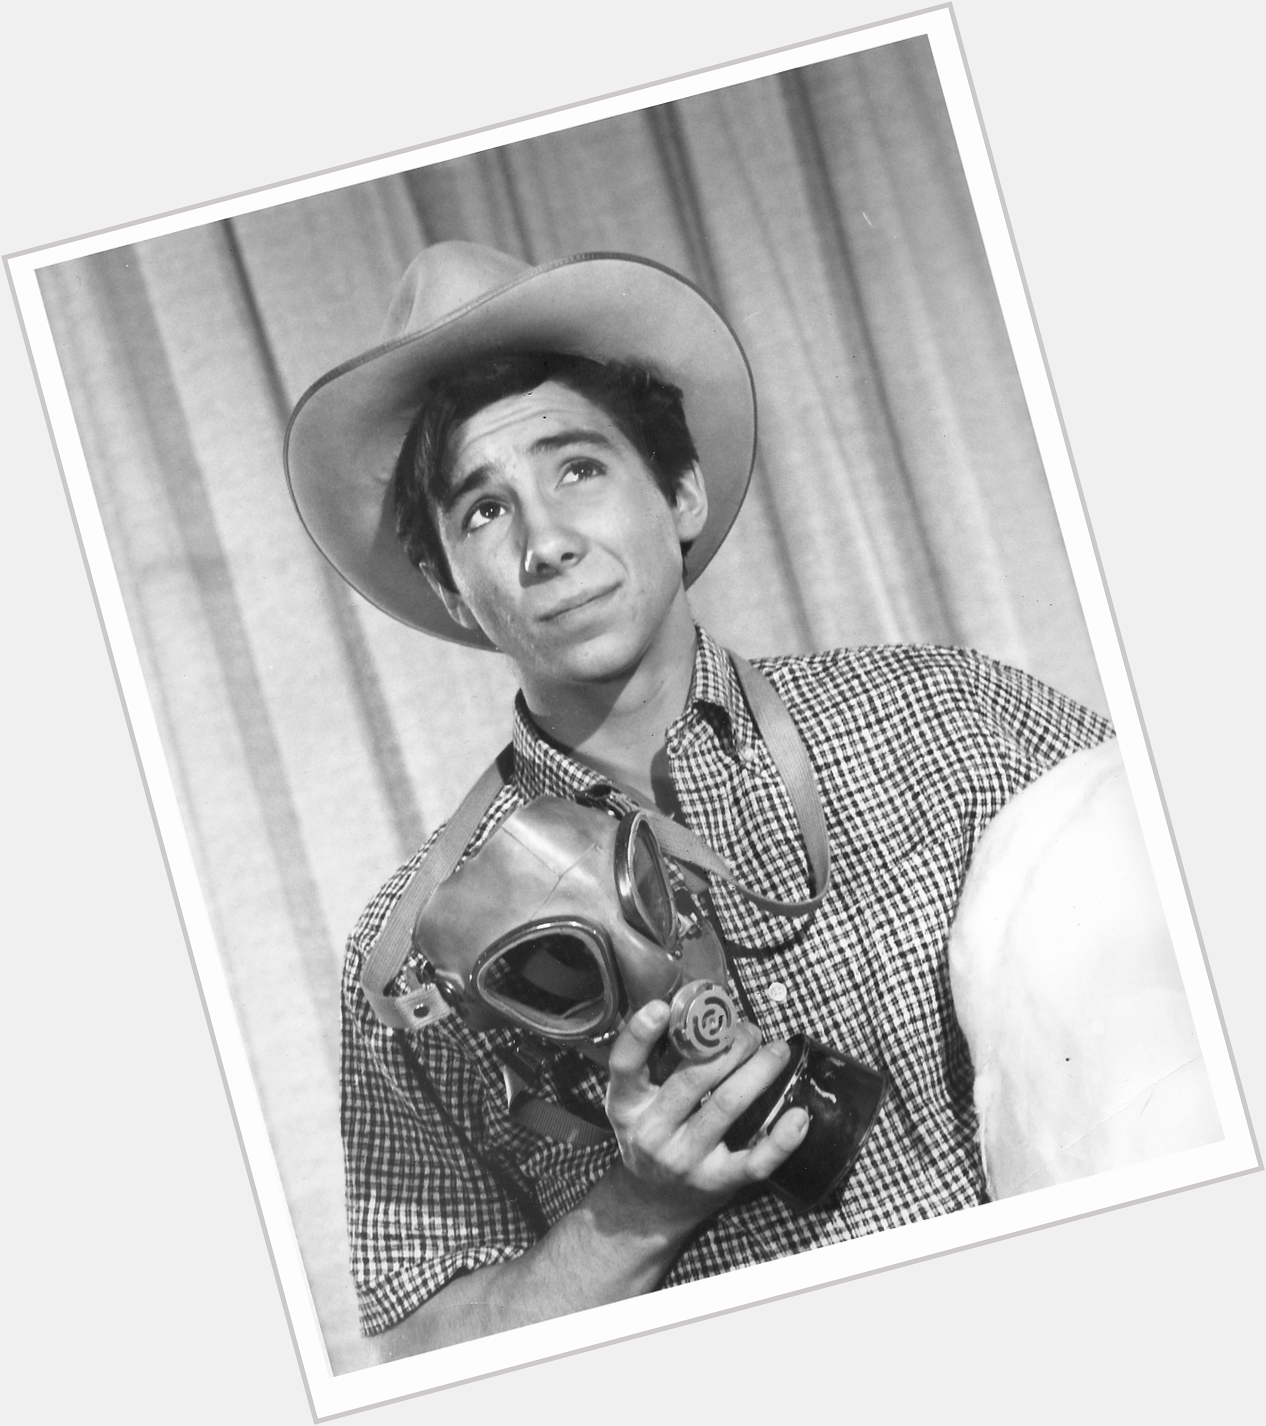 Happy Birthday to Mr Johnny Crawford, who would have been 76 years old today. 